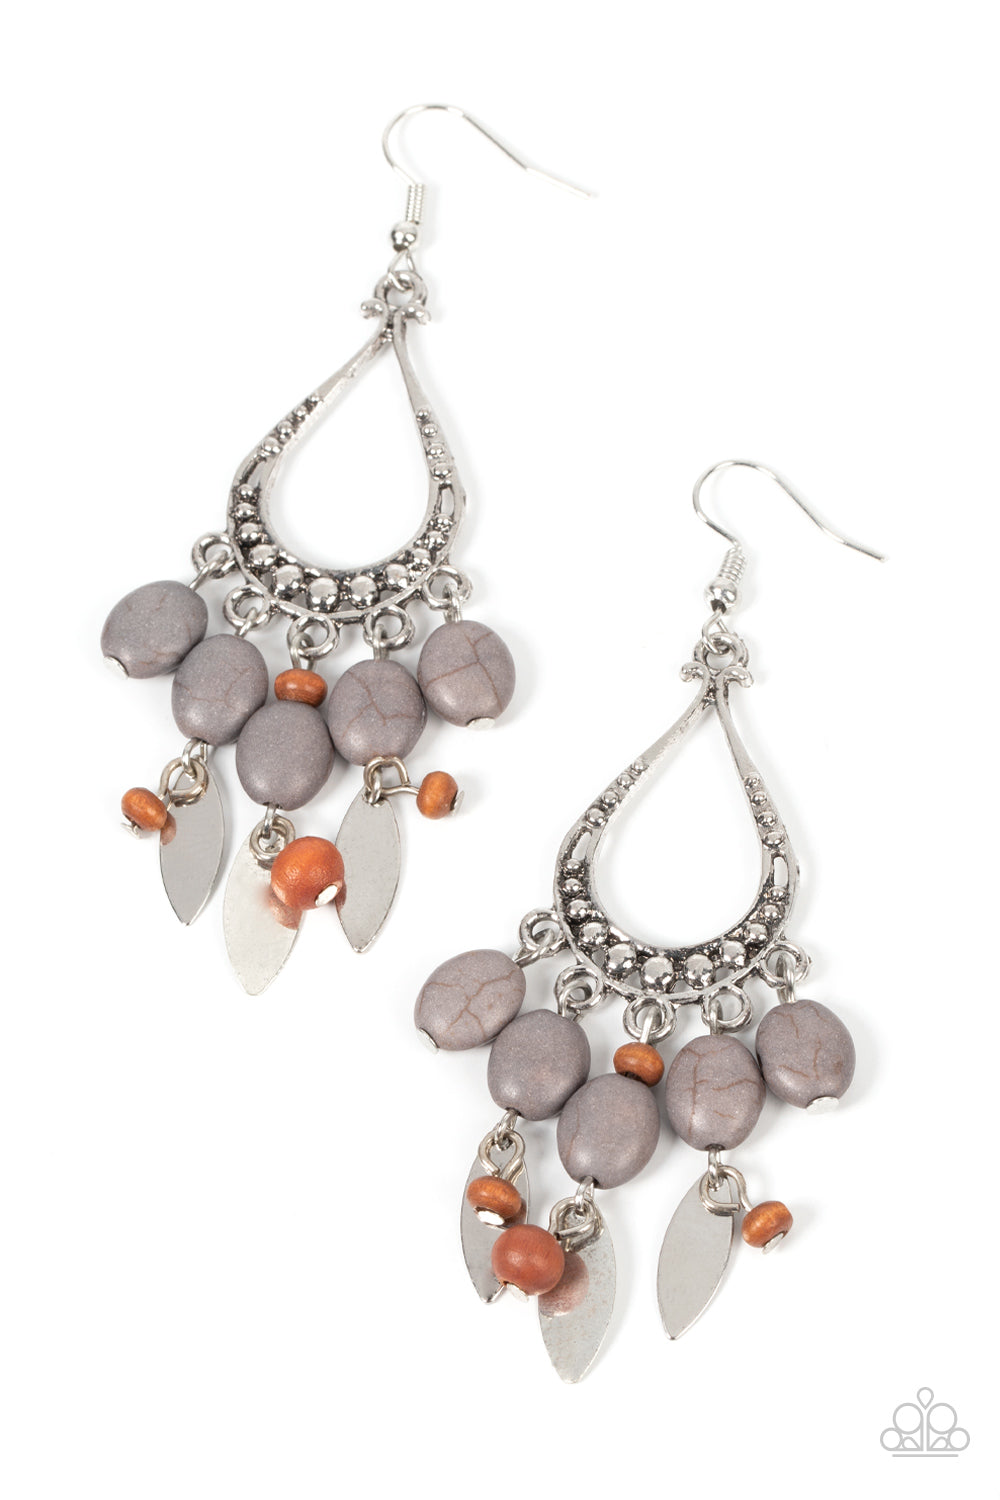 Adobe Air - Silver/Gray Earrings - Paparazzi Accessories